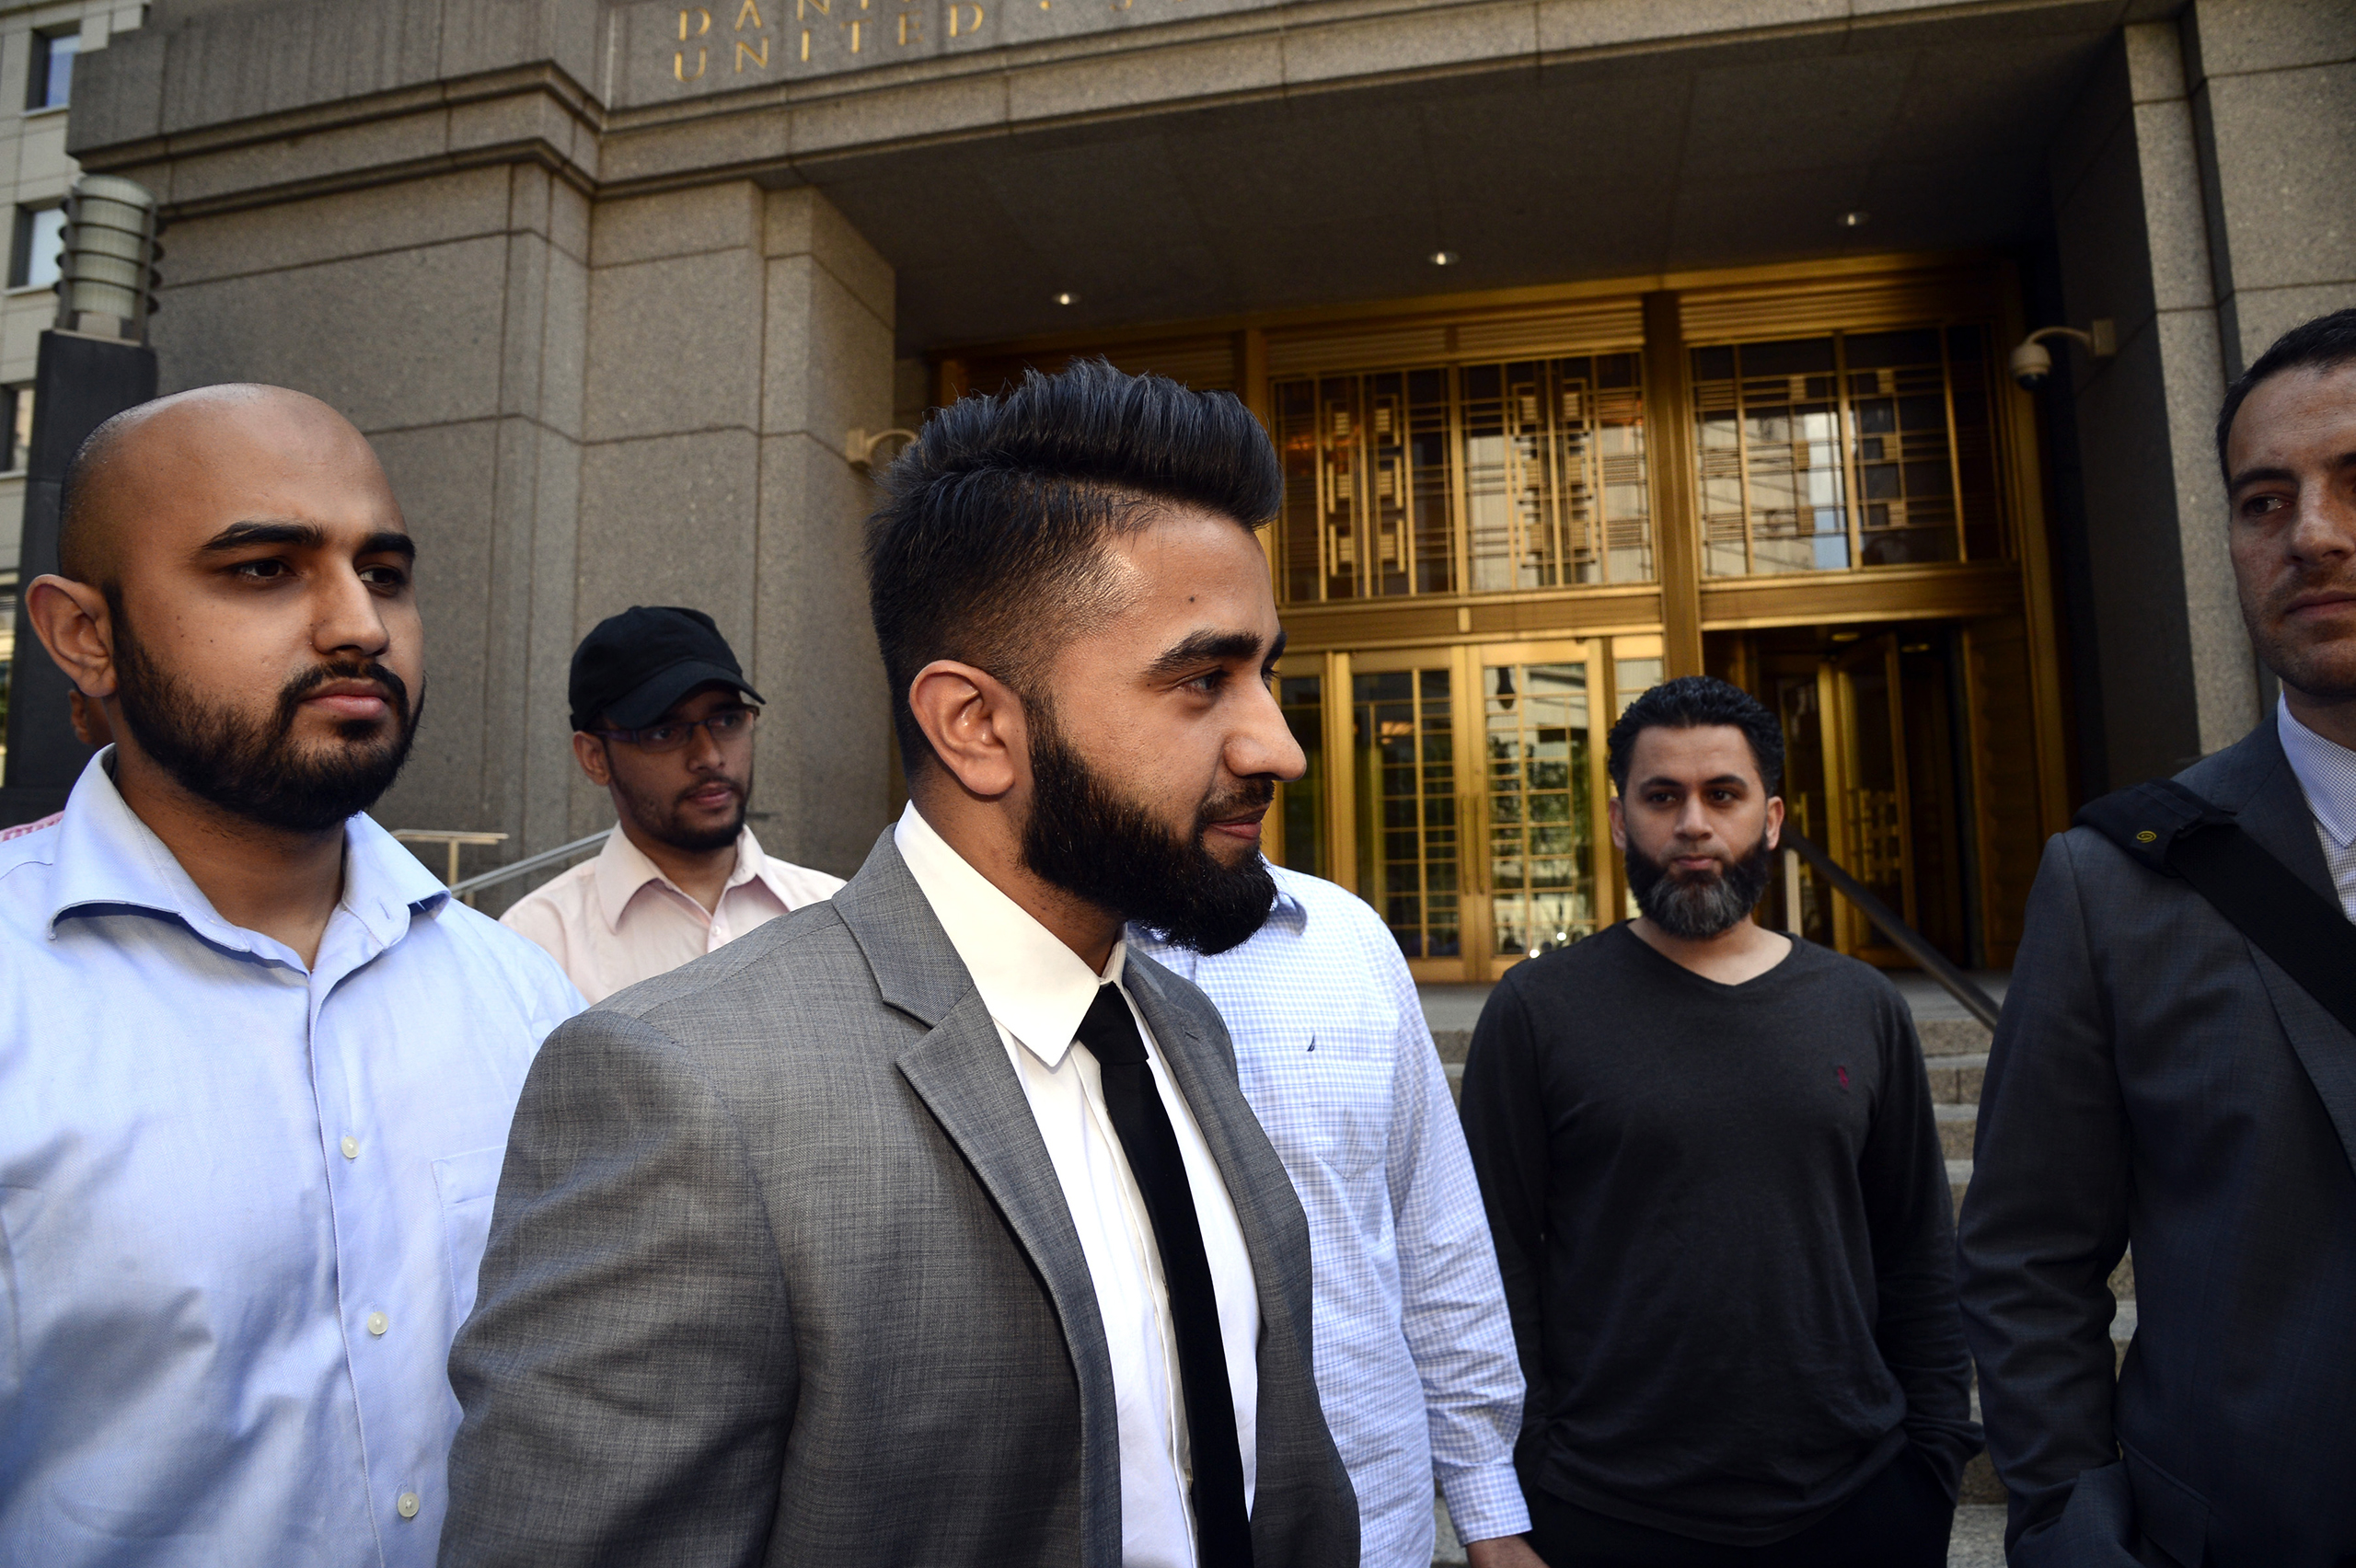 New York Police Department officer Masood Syed, center, leaves Manhattan Federal Court on June 22, 2016. Sayed, a Sunni Muslim, filed a lawsuit against the city for suspending him from the force over the length of his beard. (Jefferson Siegel—NY Daily News/Getty Images)